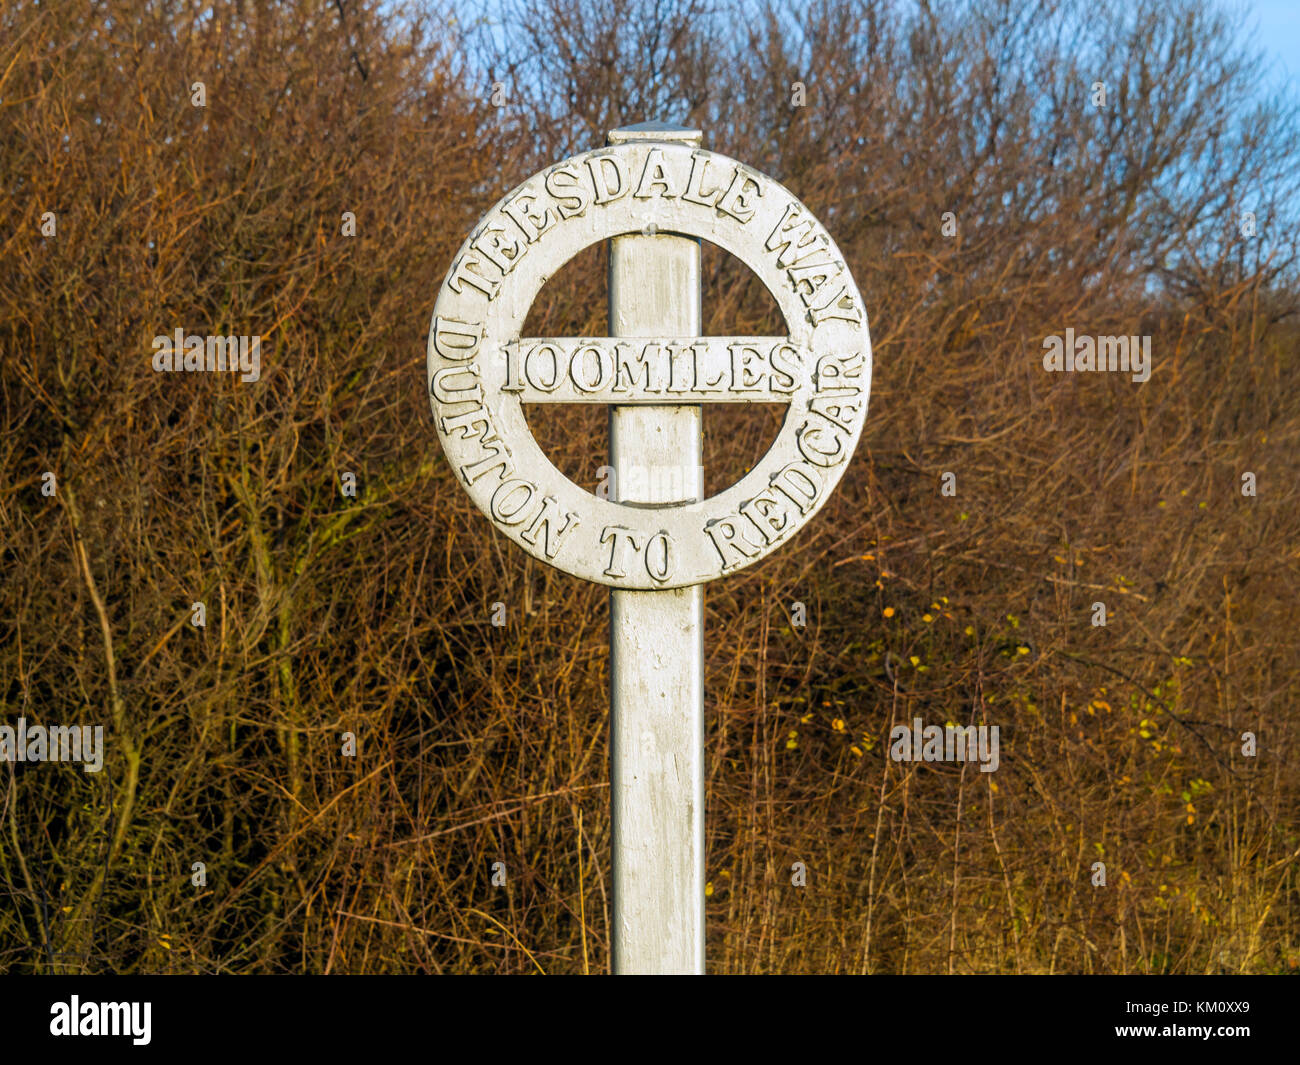 Coatham Marsh Nature reserve a sculpture of a signpost rucksack and stool marking the end of the Teesdale Way long distance walk Stock Photo